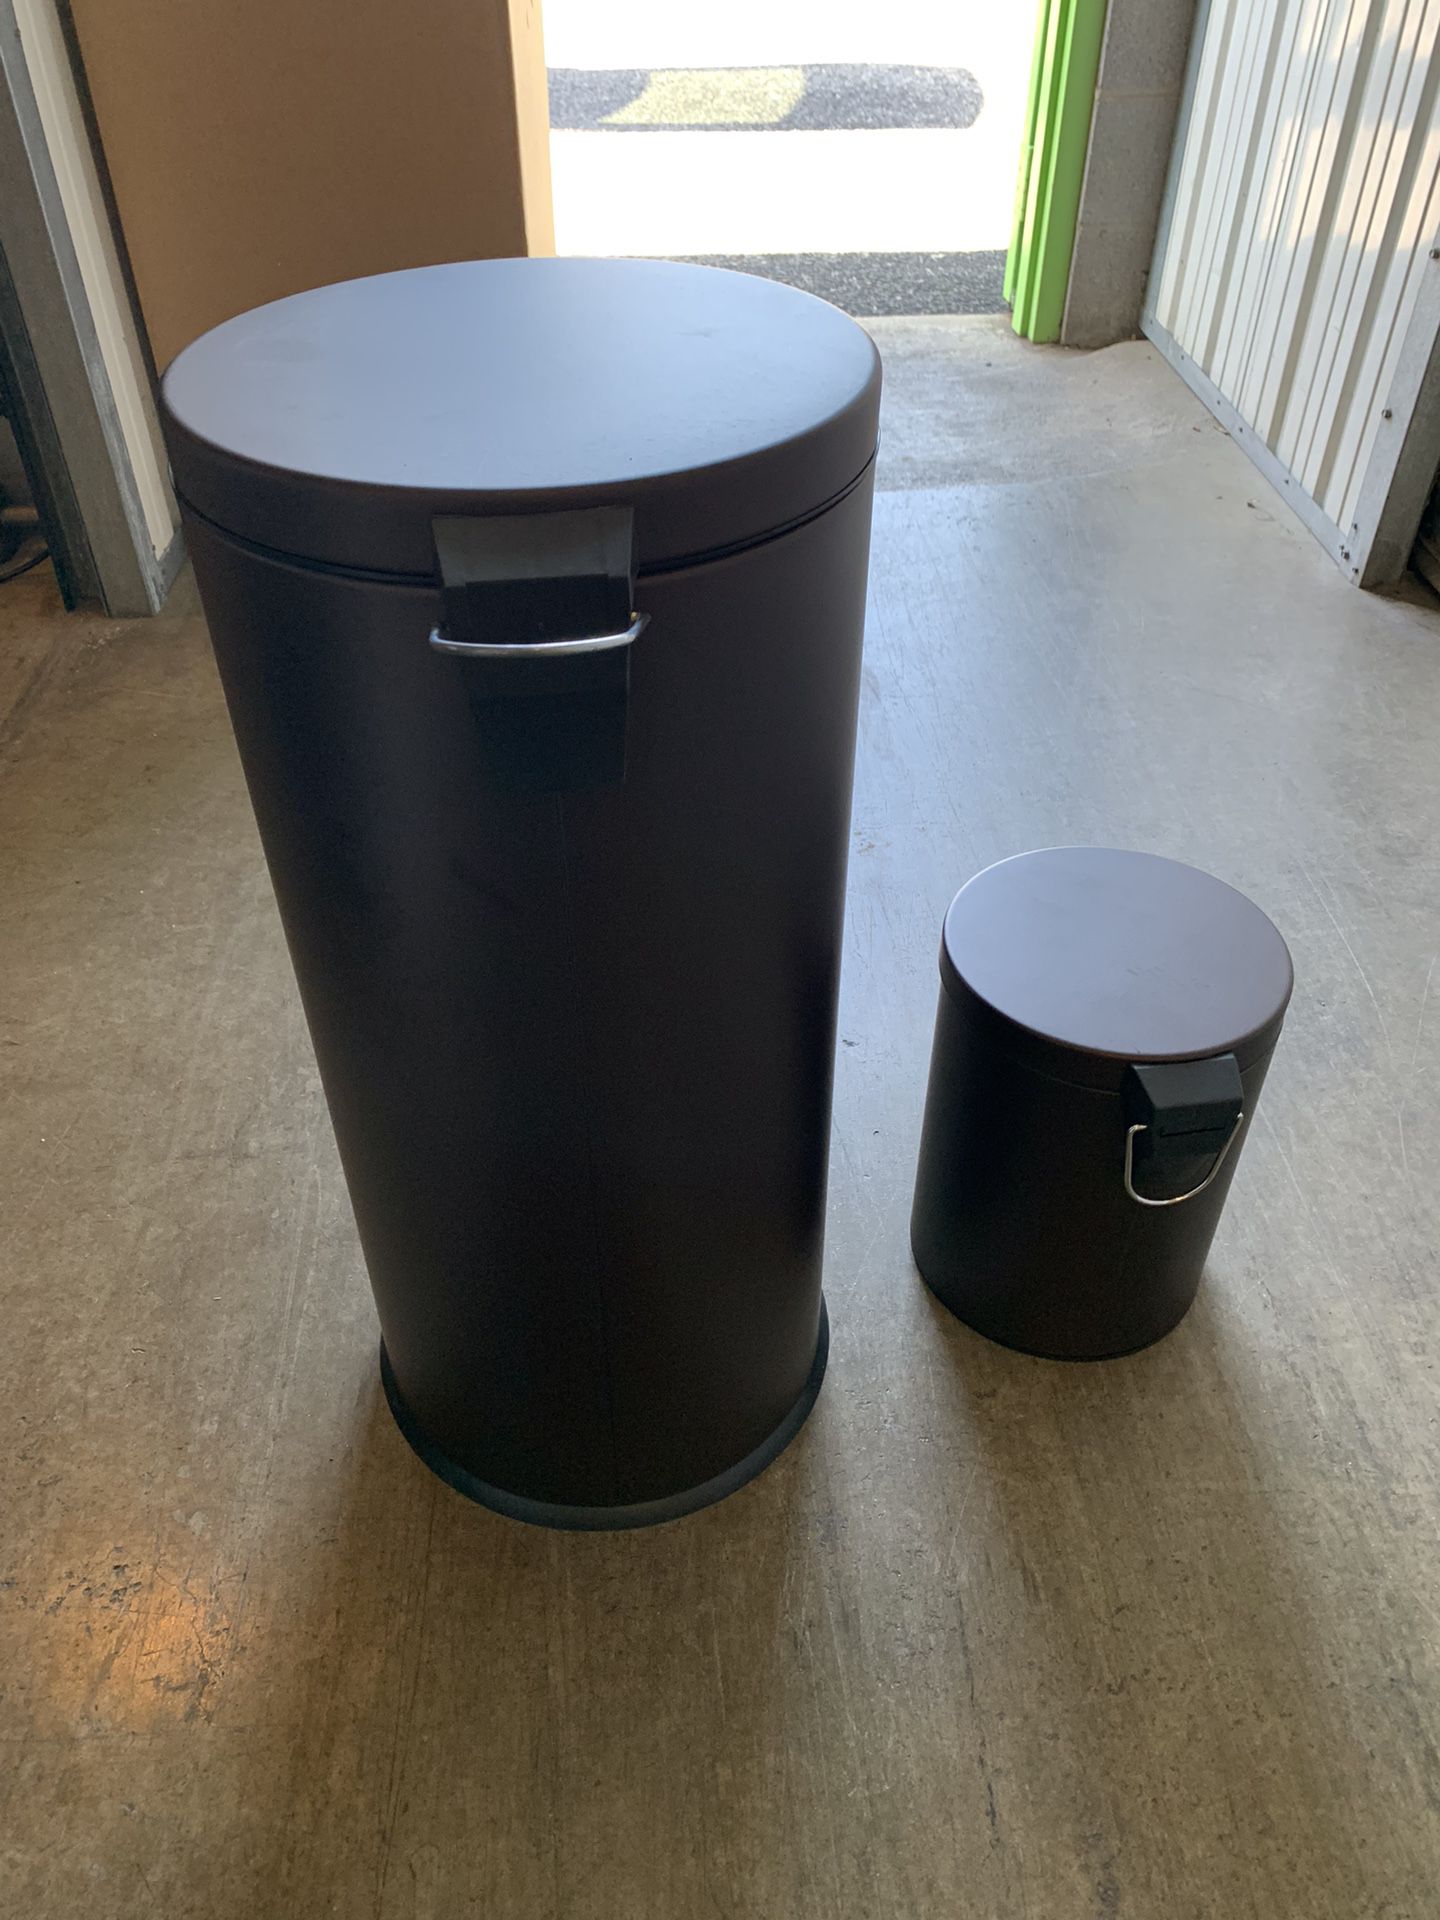 Two (2) New Brown Round Trash cans